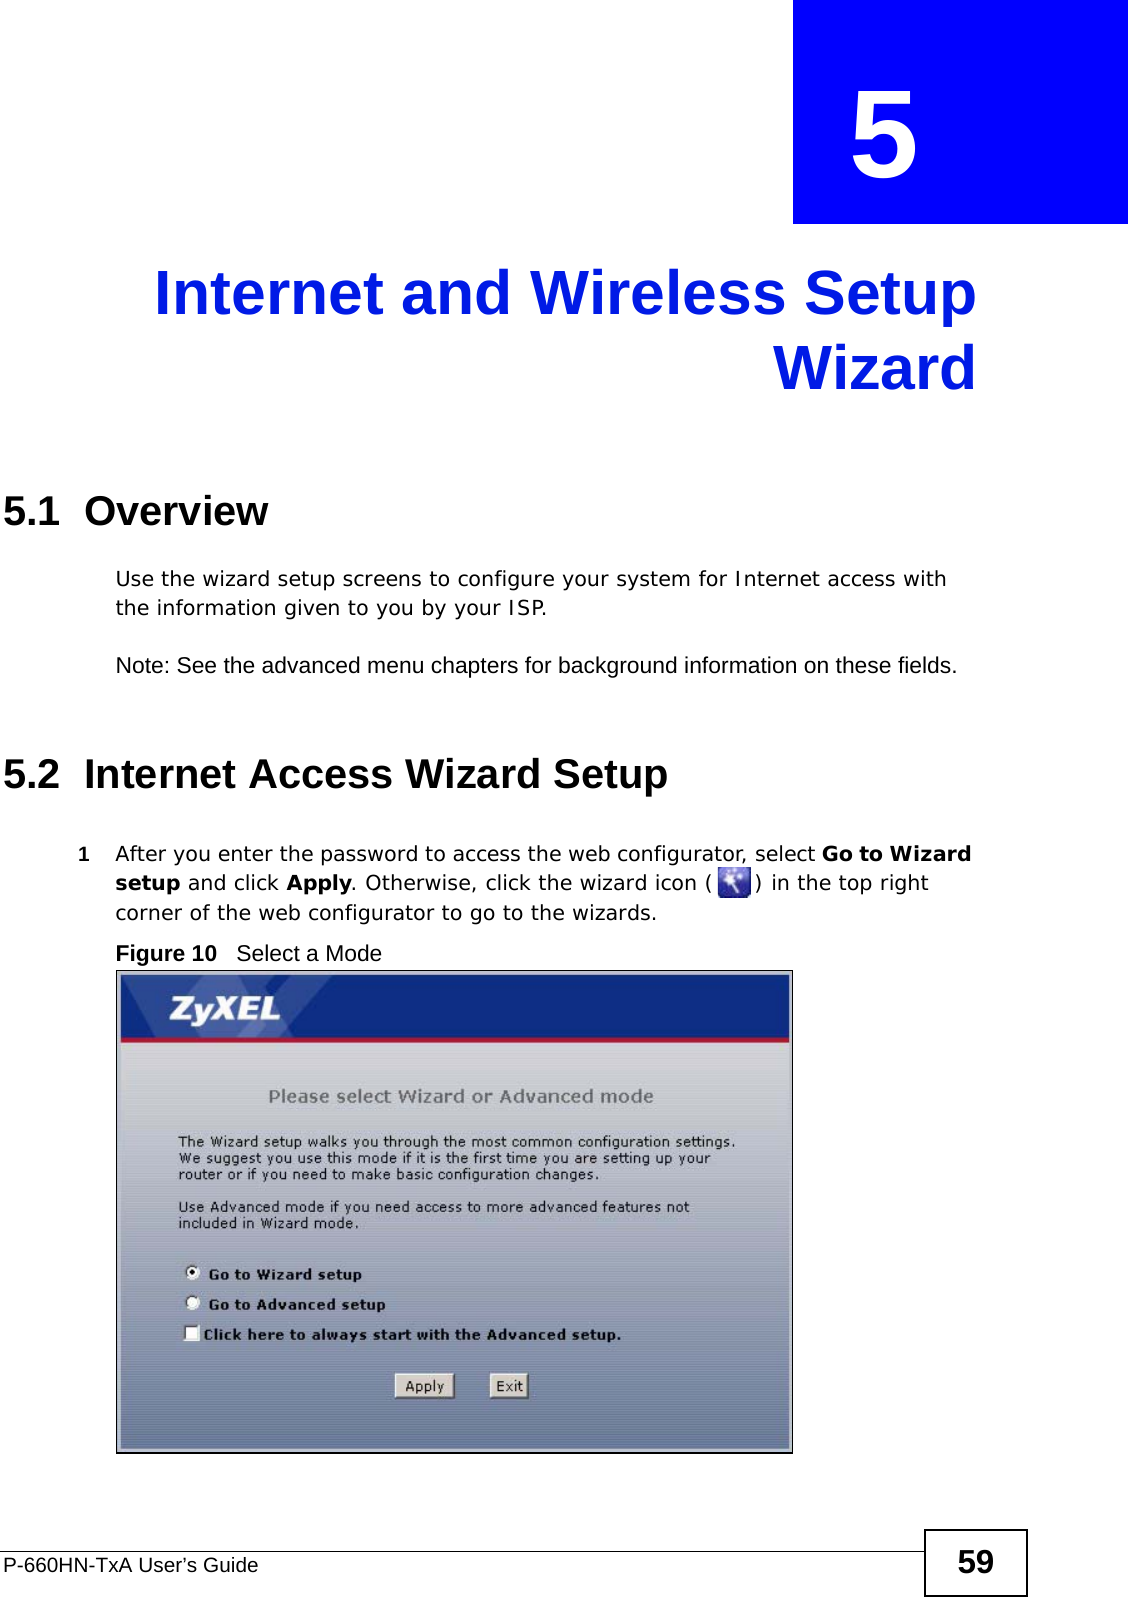 P-660HN-TxA User’s Guide 59CHAPTER  5 Internet and Wireless SetupWizard5.1  OverviewUse the wizard setup screens to configure your system for Internet access with the information given to you by your ISP. Note: See the advanced menu chapters for background information on these fields.5.2  Internet Access Wizard Setup1After you enter the password to access the web configurator, select Go to Wizard setup and click Apply. Otherwise, click the wizard icon ( ) in the top right corner of the web configurator to go to the wizards. Figure 10   Select a Mode